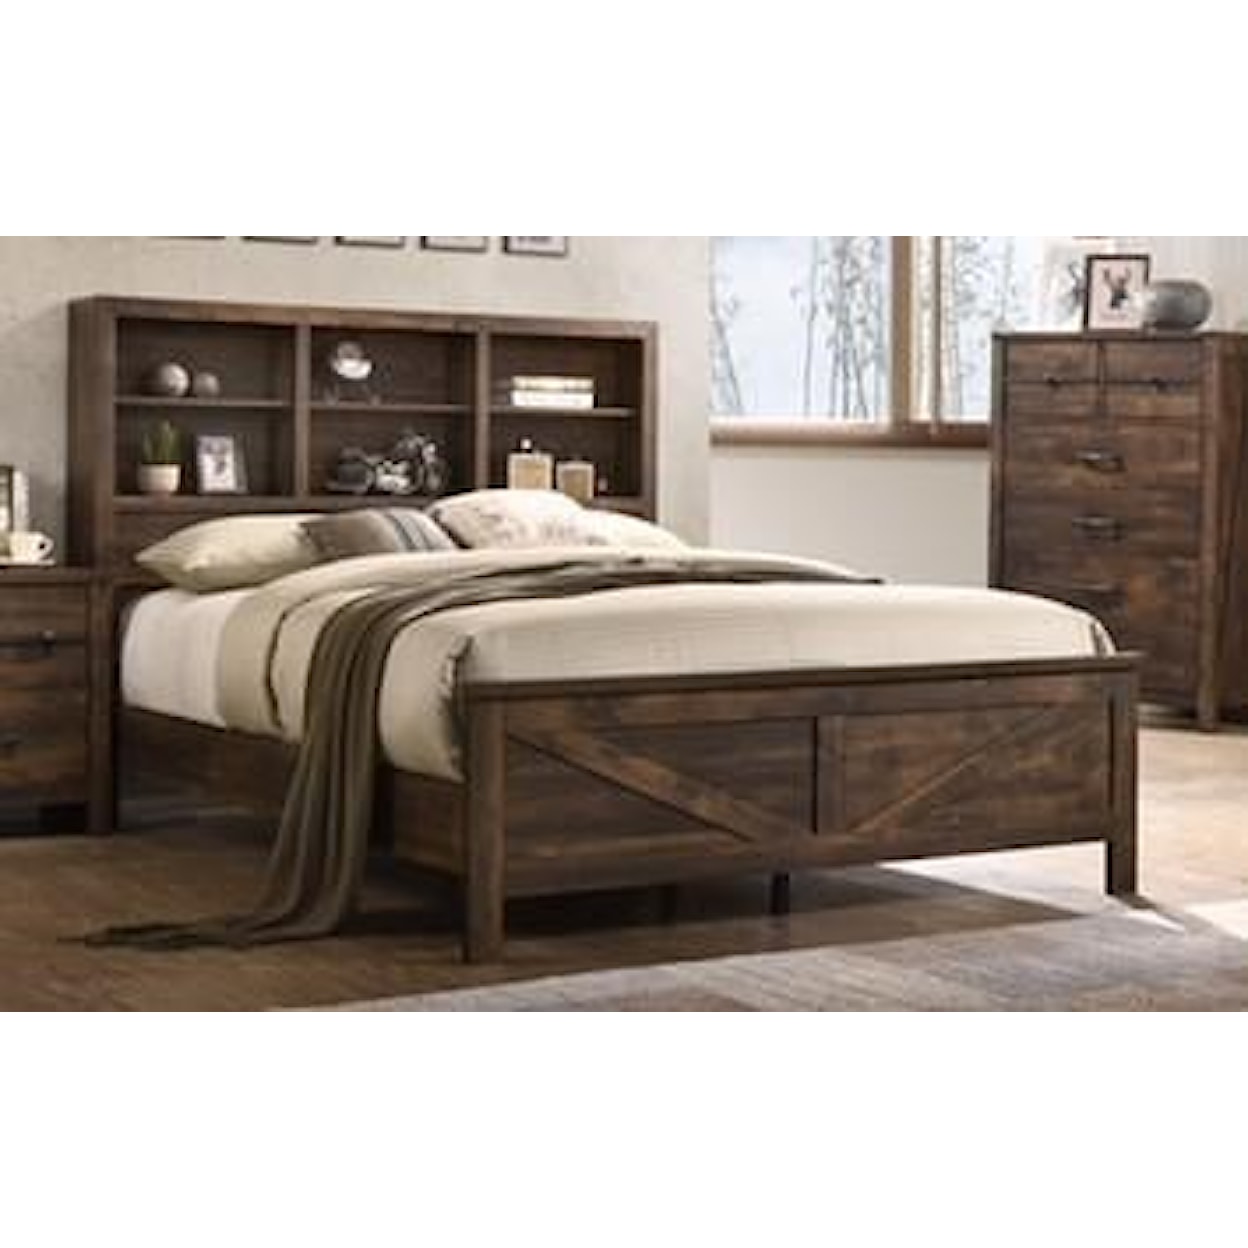 Lifestyle C8100A Full Bookcase Bed